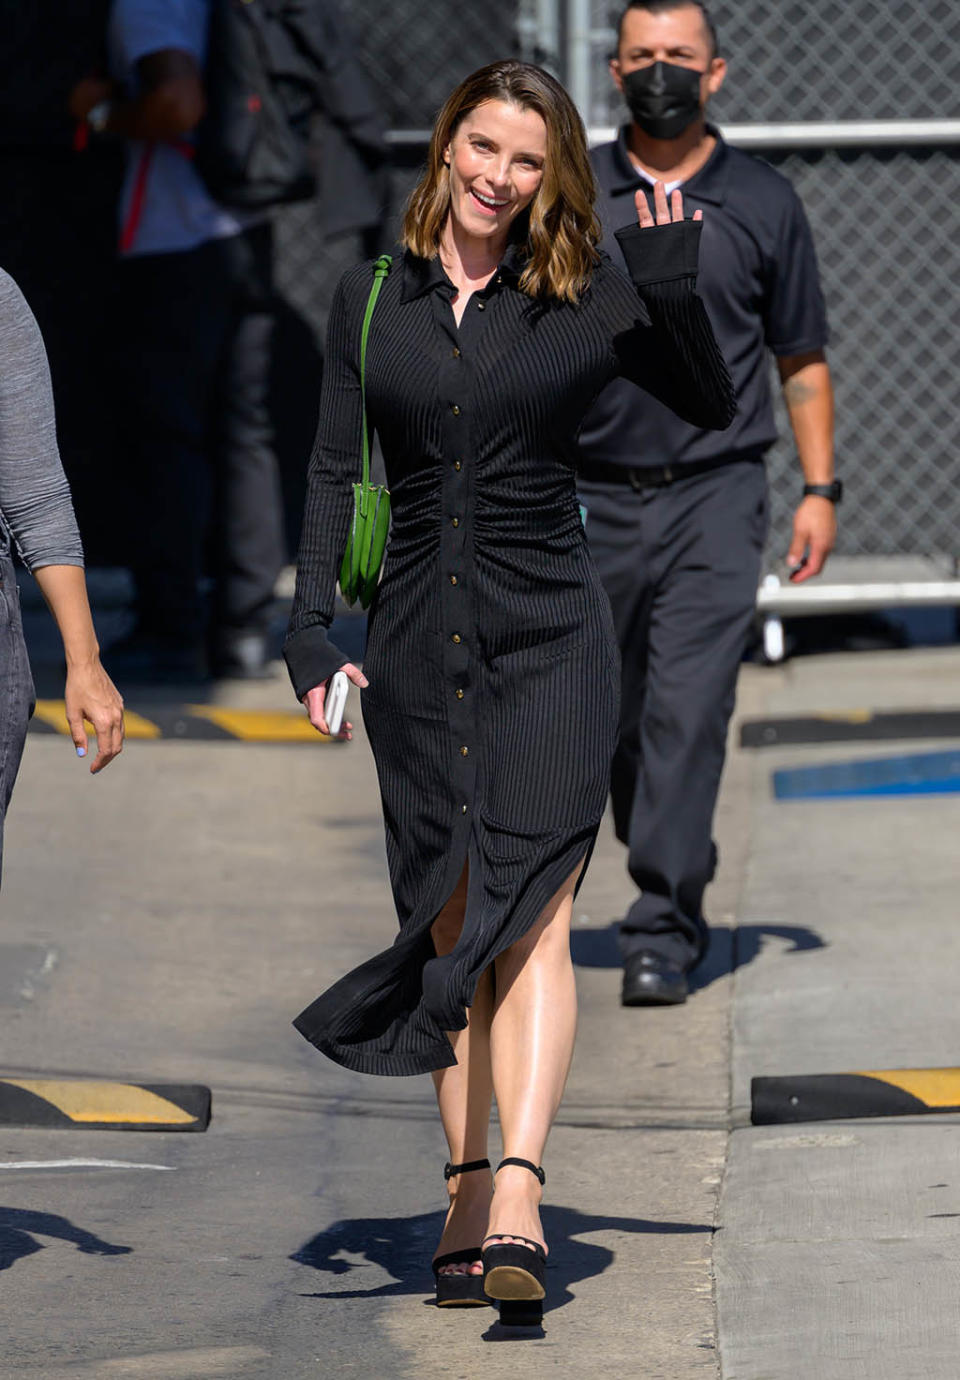 Betty Gilpin arrives at “Jimmy Kimmel Live” in Los Angeles on June 6, 2022. - Credit: RB/Bauergriffin.com / MEGA